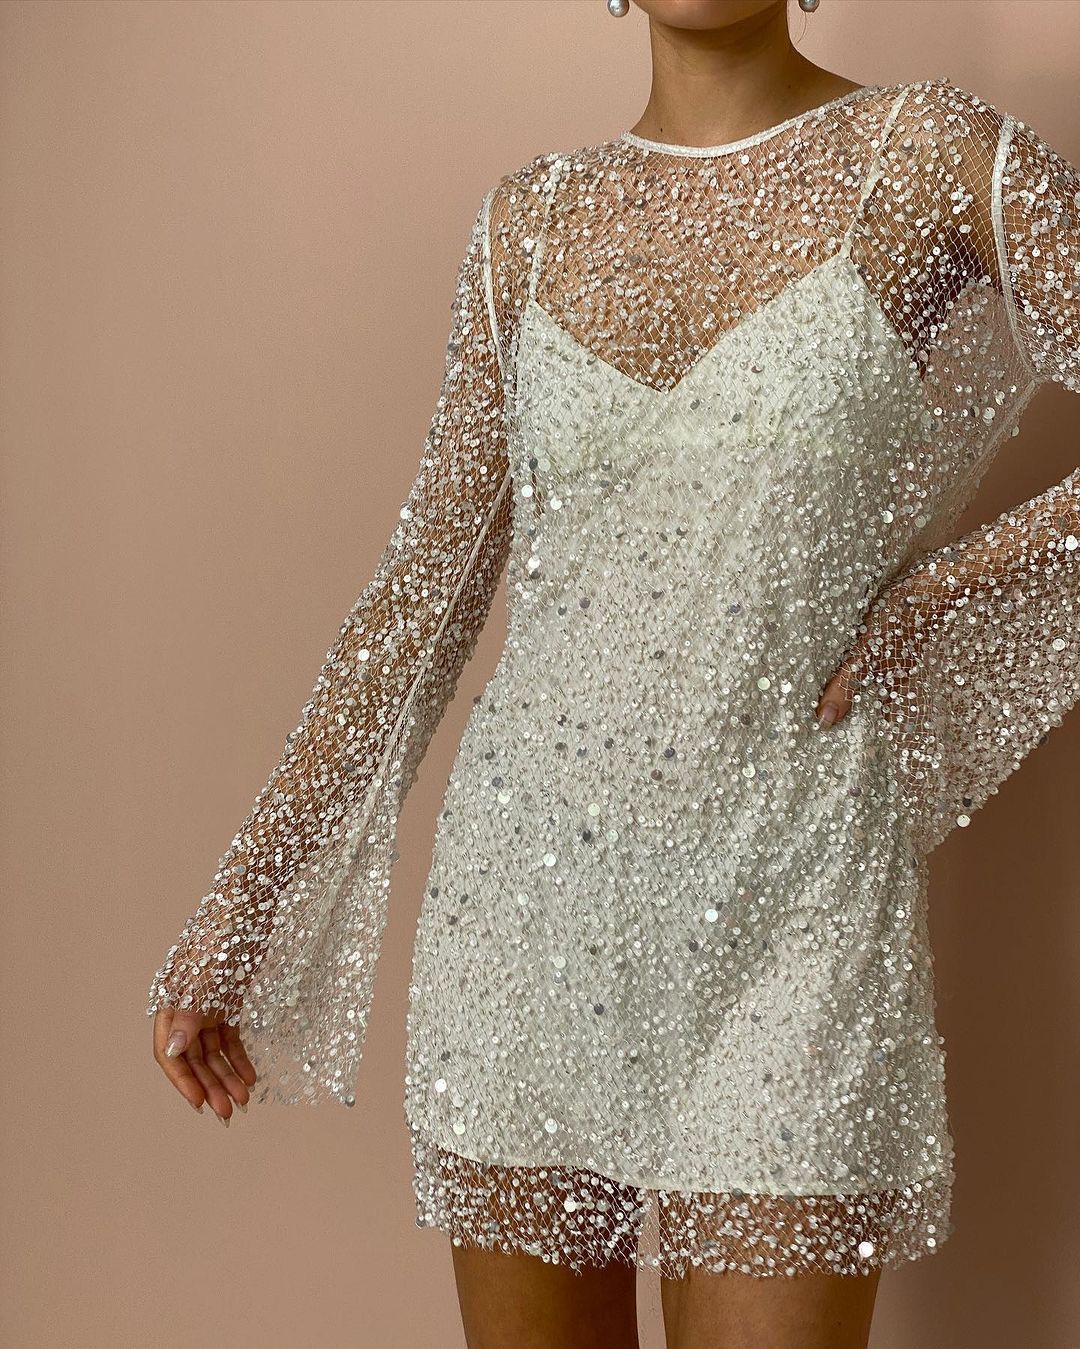 XMAS Sequined Mesh Mini Dress (2-IN-ONE)